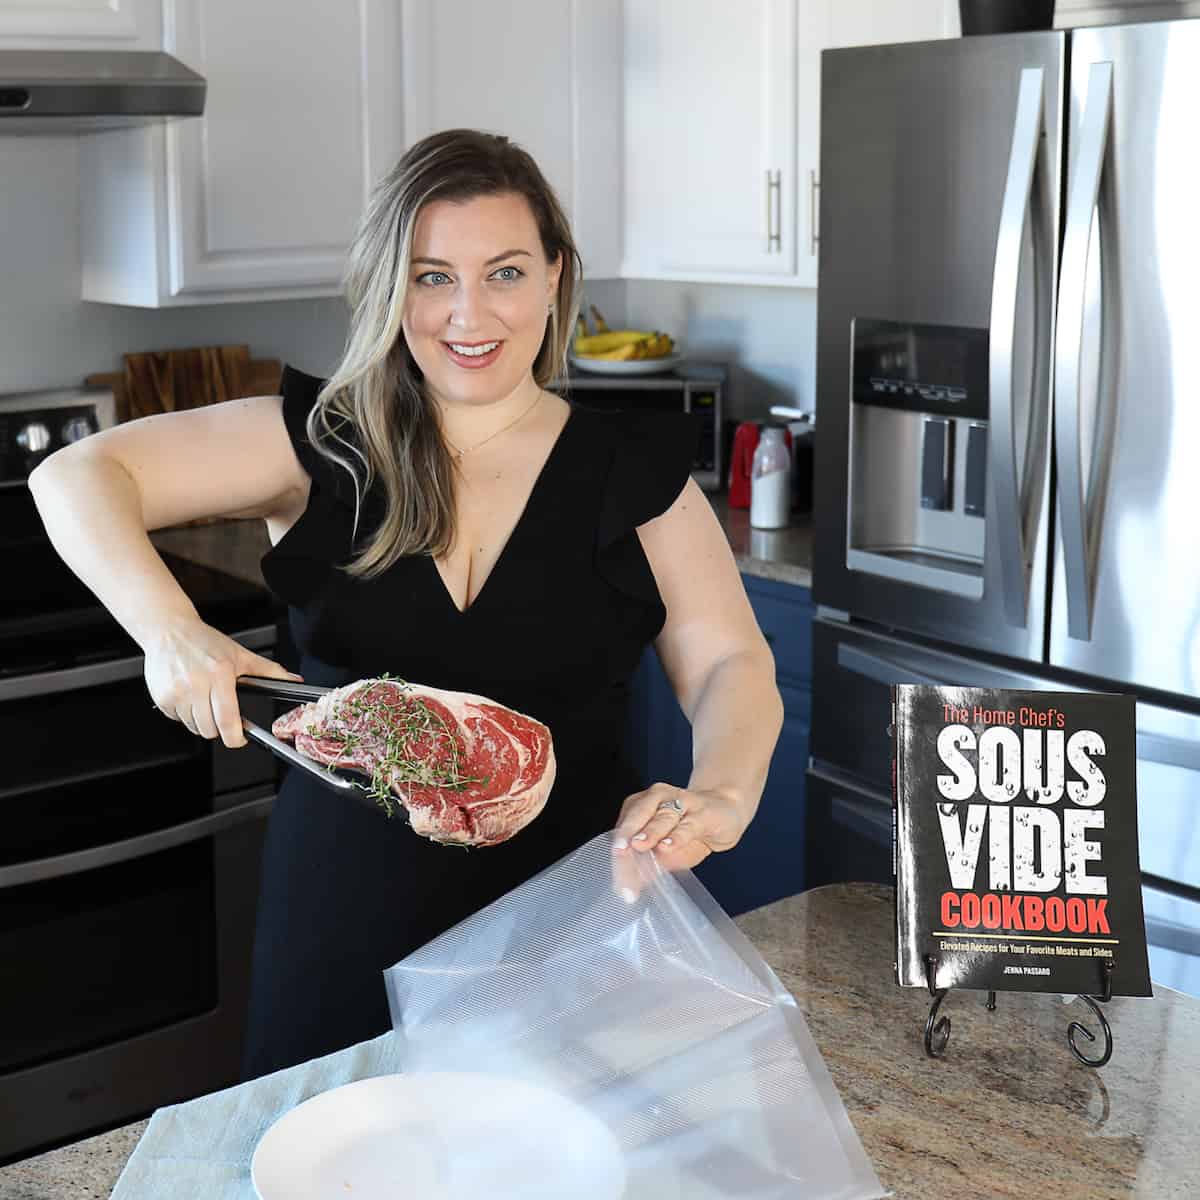 jenna passaro with steak and the home chef's sous vide cookbook